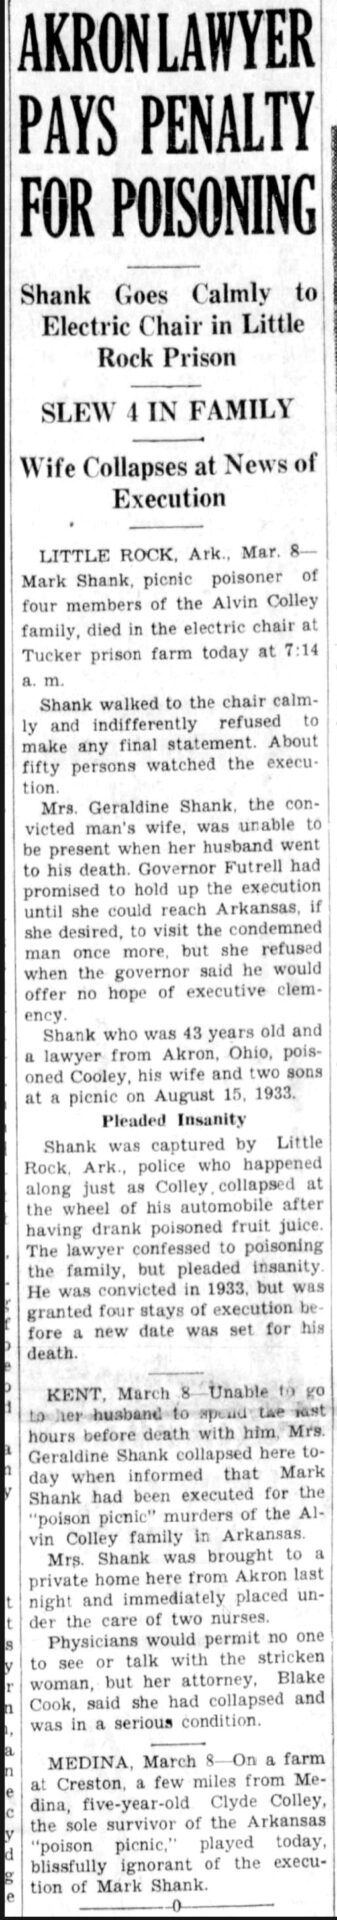 "Akron Lawyer Pays Penalty for Poisoning" newspaper clipping